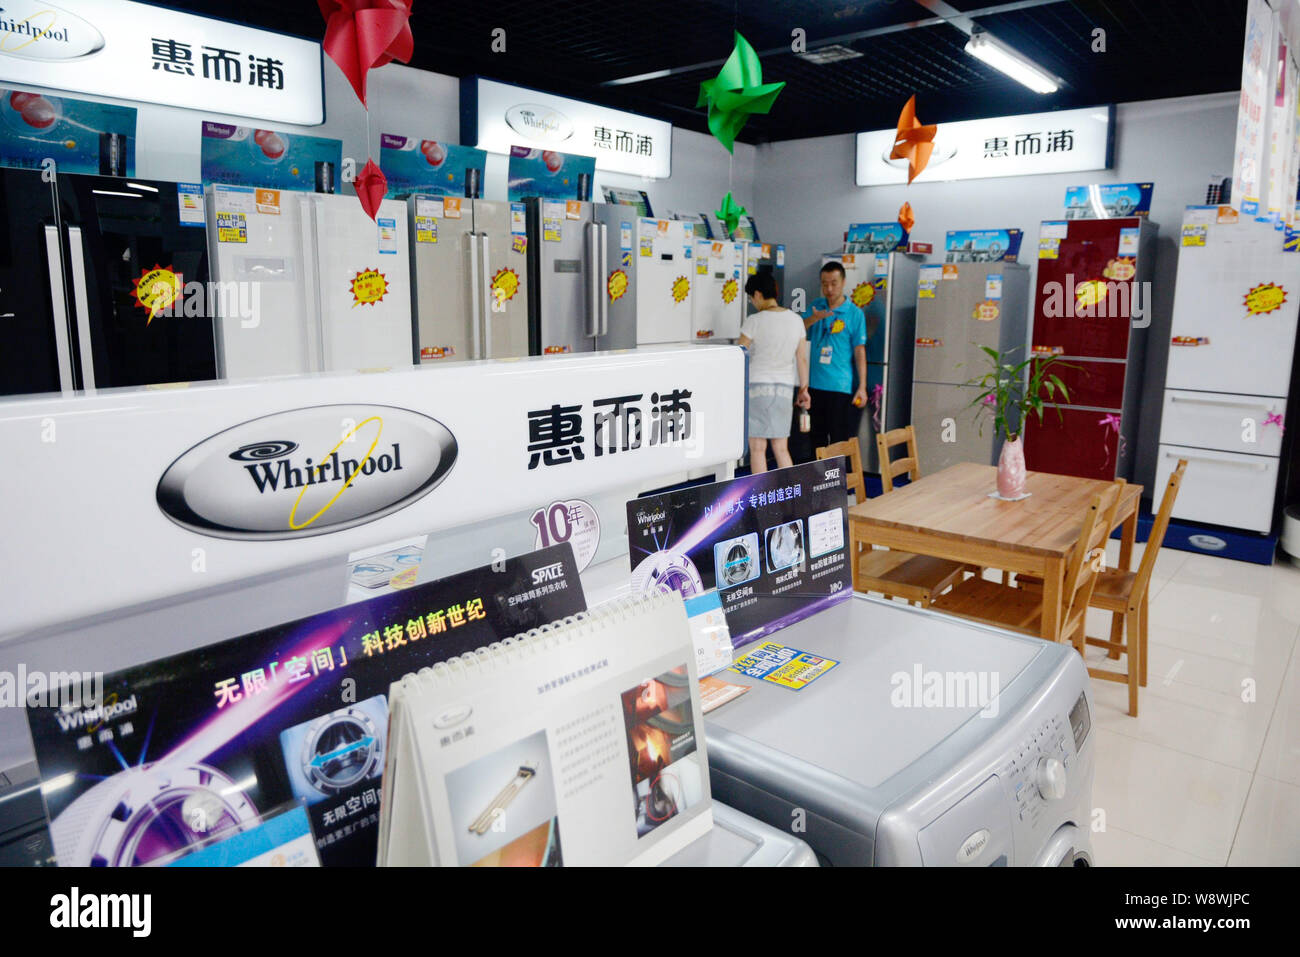 --FILE--A customer looks at Whirlpool refrigerators at a home appliances store in Dalian city, northeast Chinas Liaoning province, 4 August 2013.   Wh Stock Photo